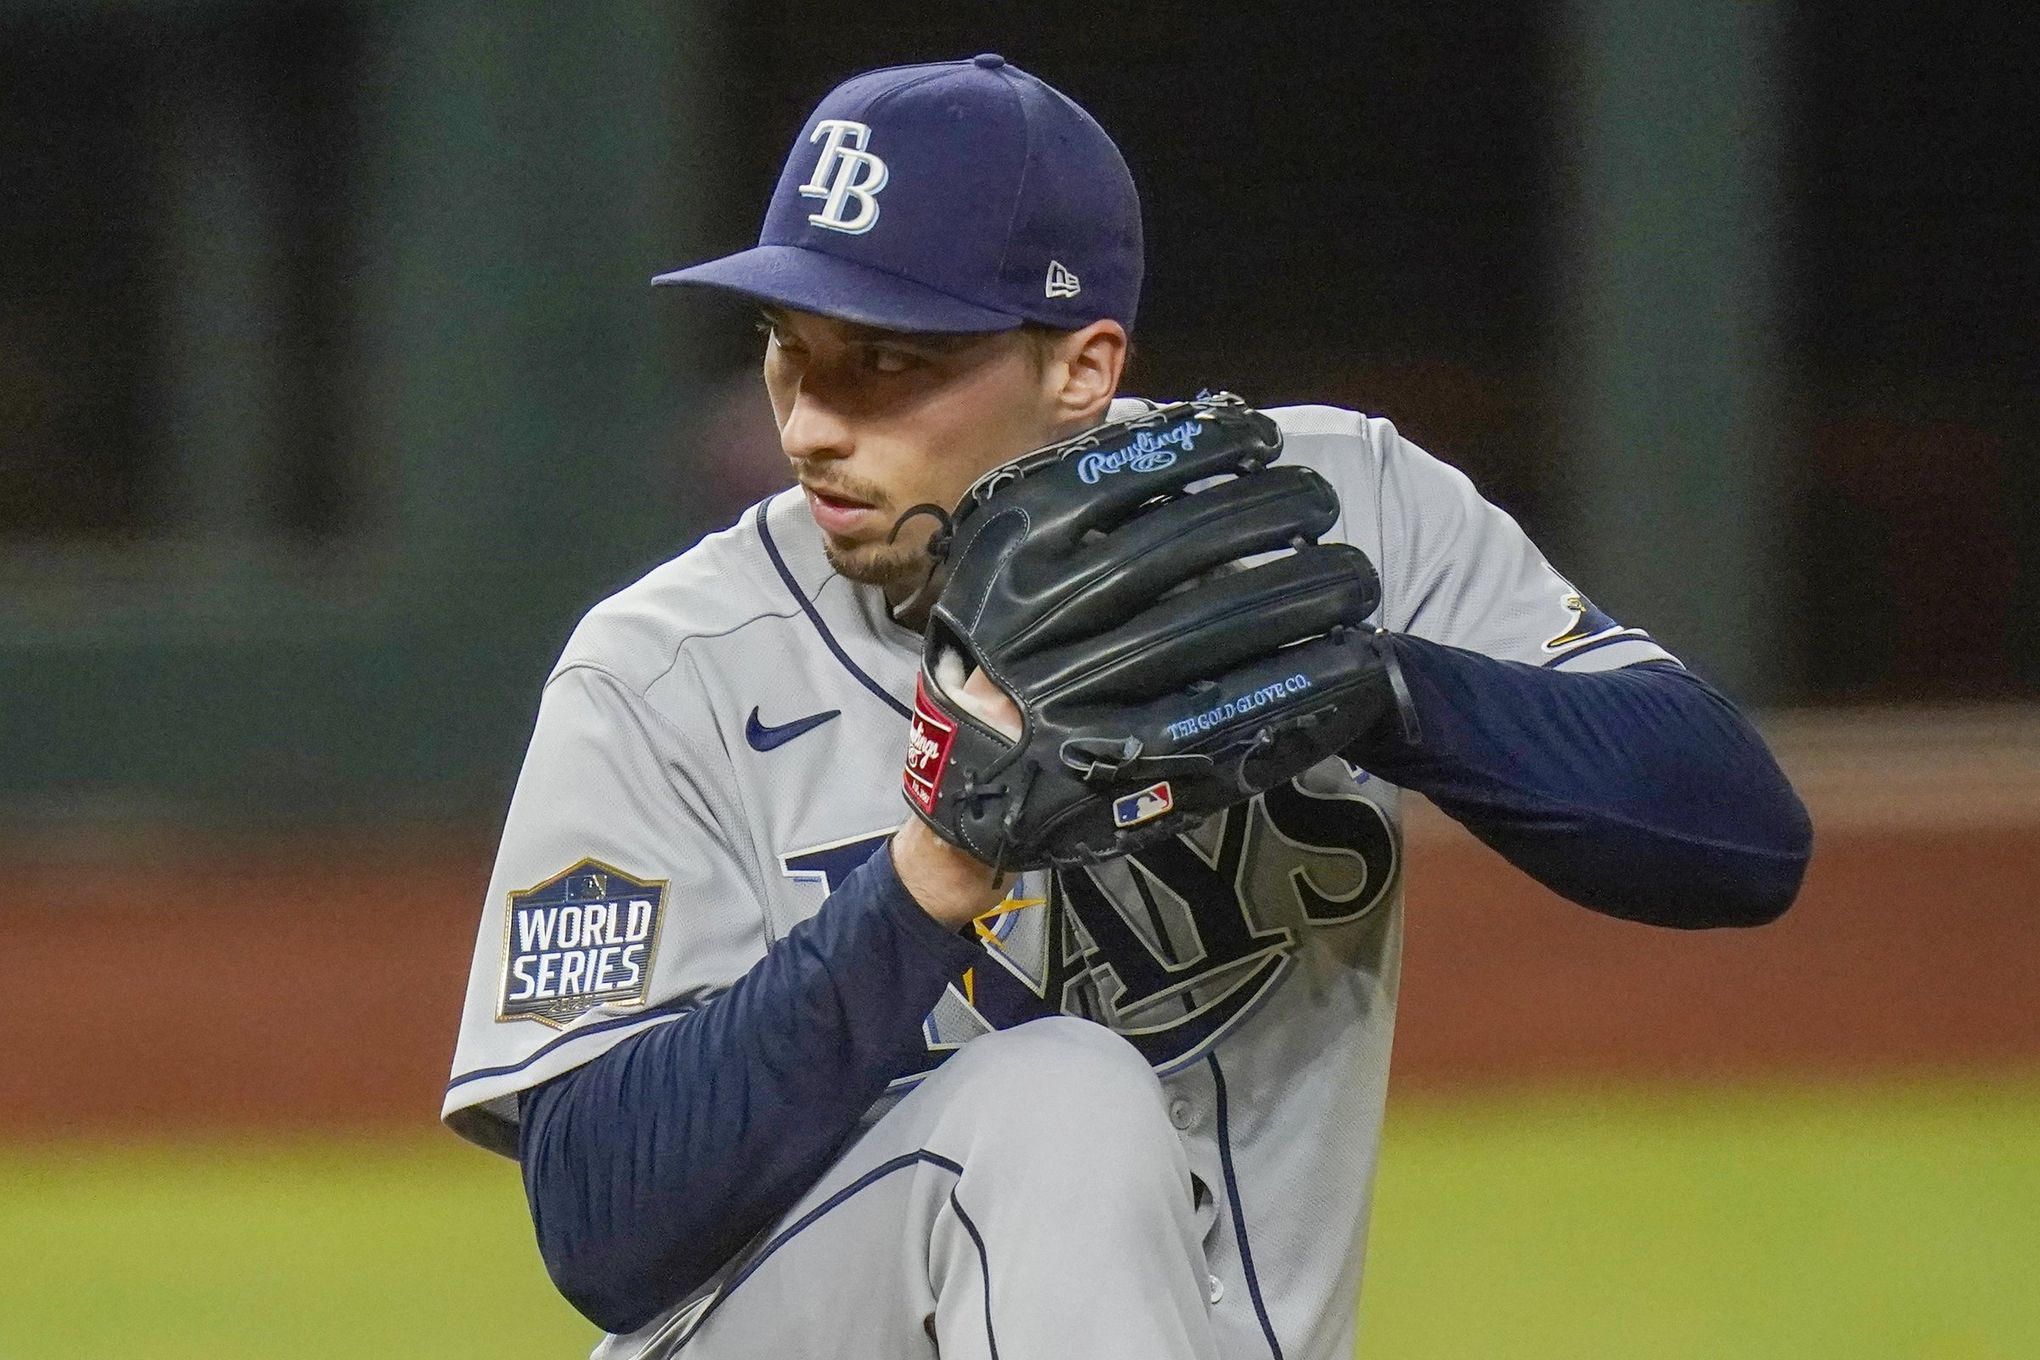 Dodgers: Blake Snell Says the Rays Handed the World Series to Los Angeles